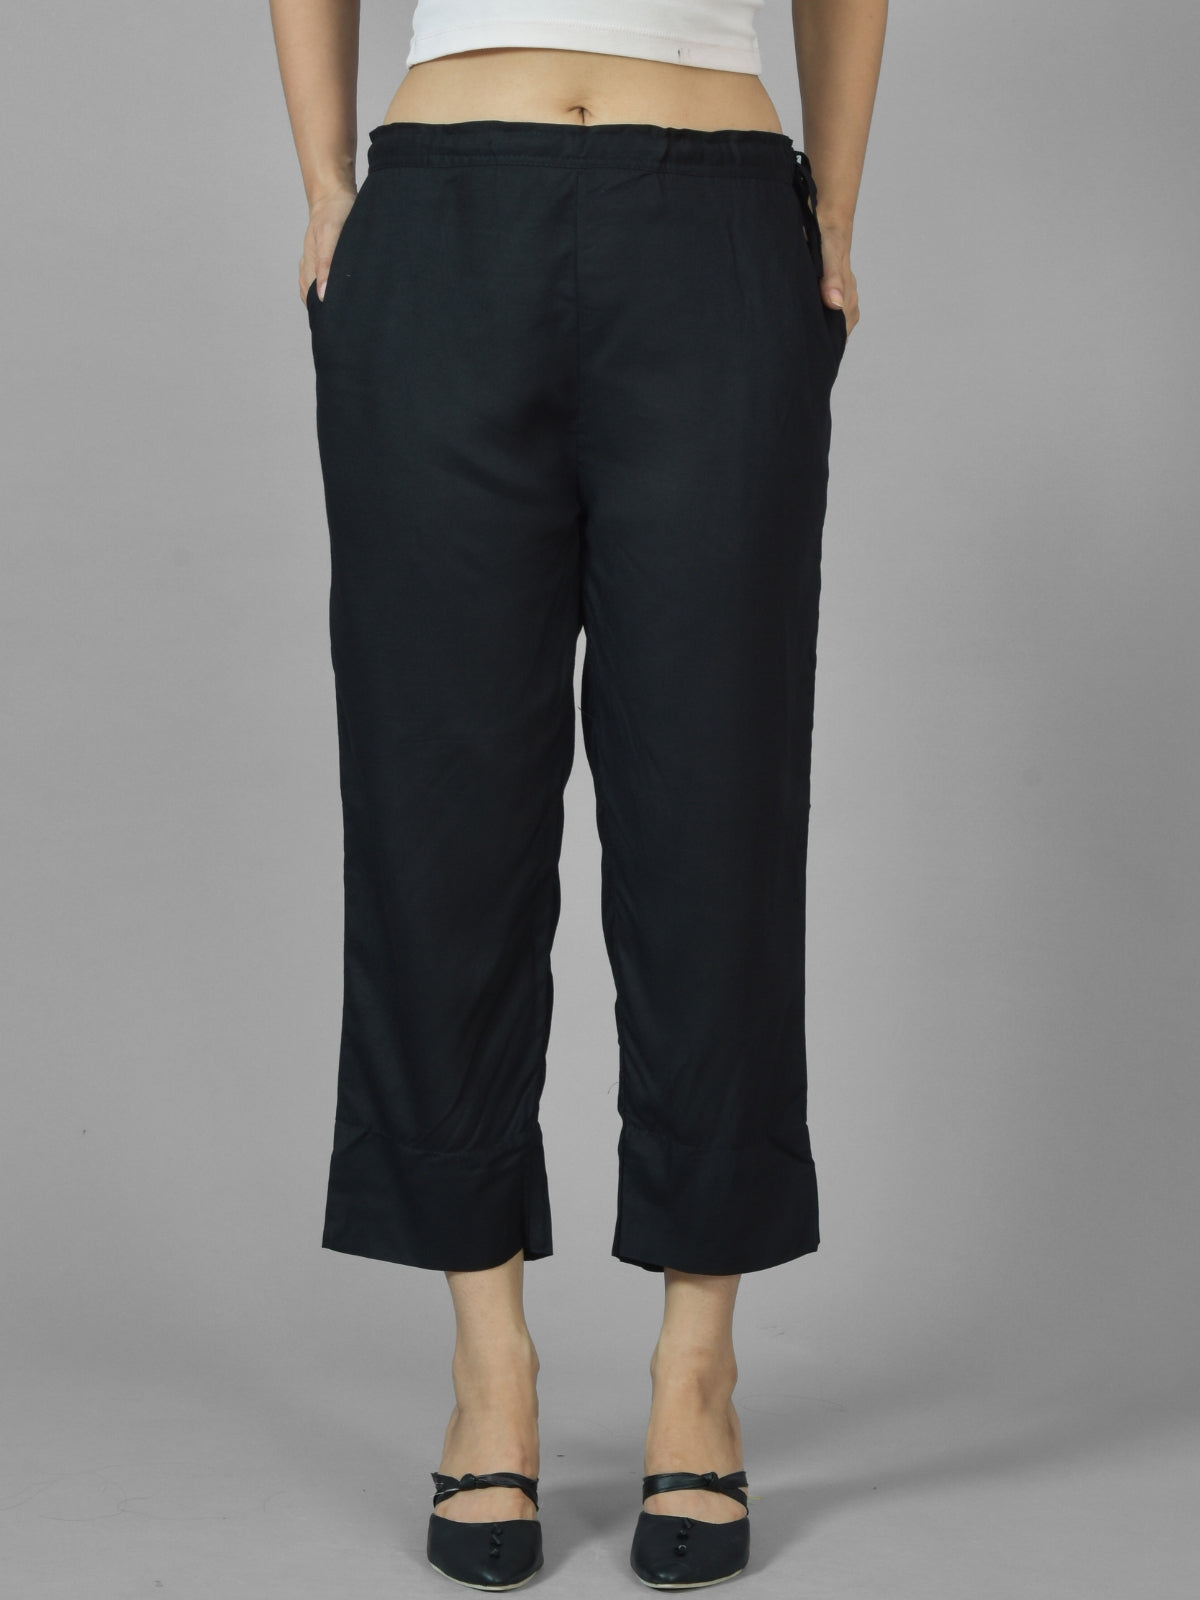 Pack Of 2 Womens Black And Mustard Ankle Length Rayon Culottes Trouser Combo